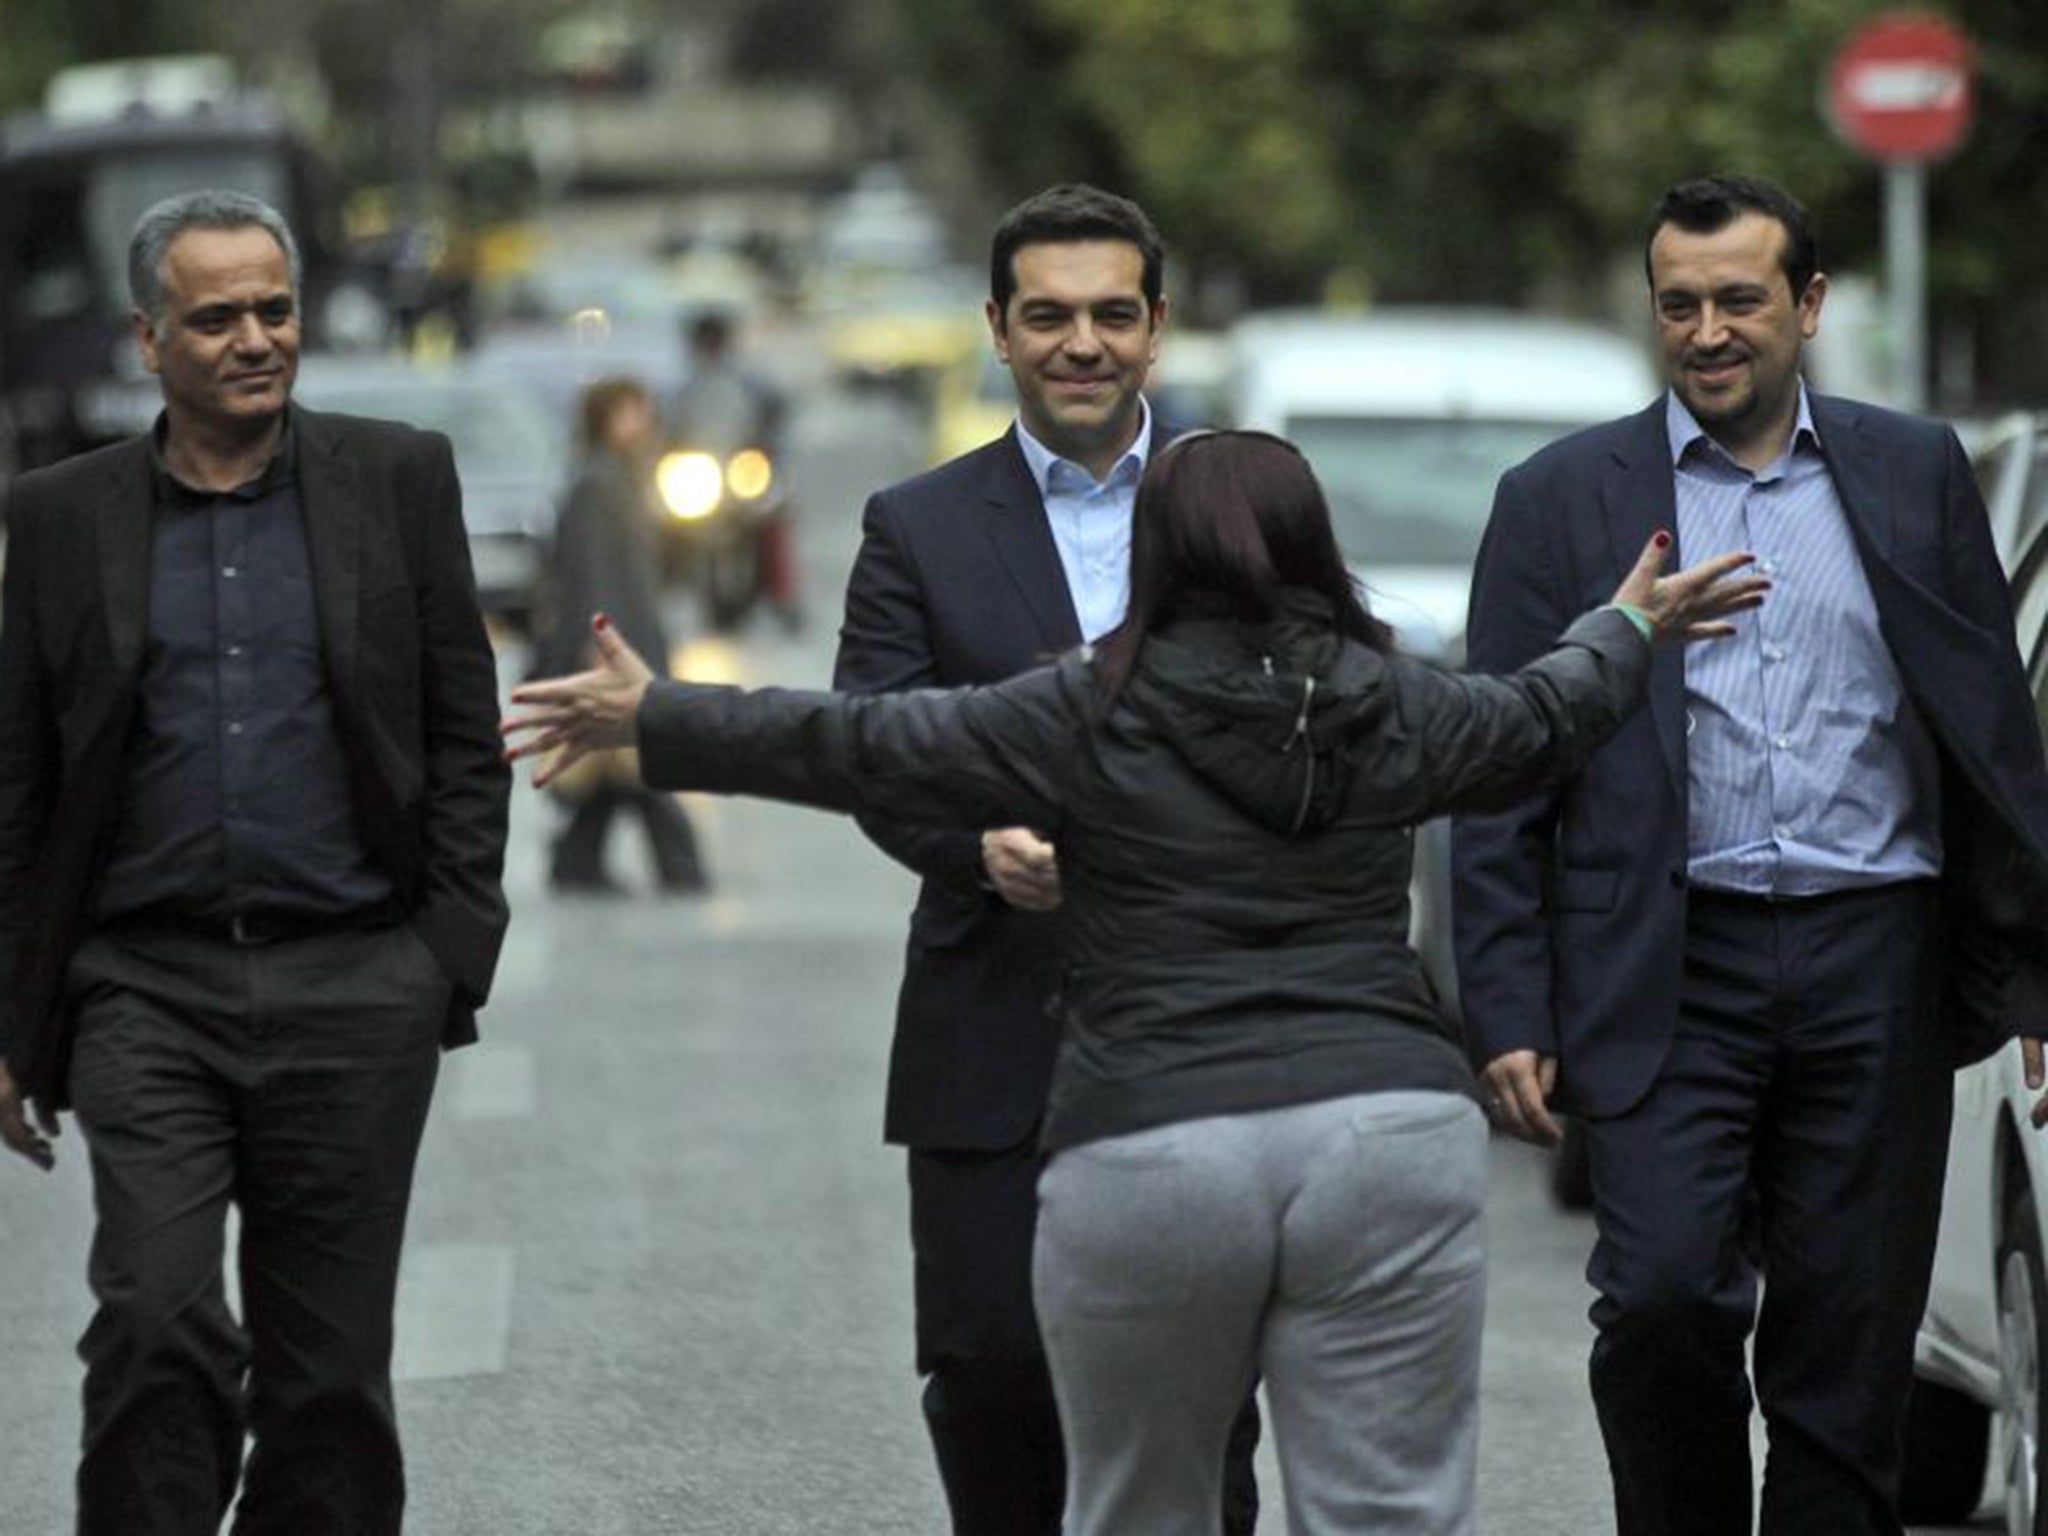 A voter greets new Greek PM Alexis Tsipras in the street following his election victory (EPA)